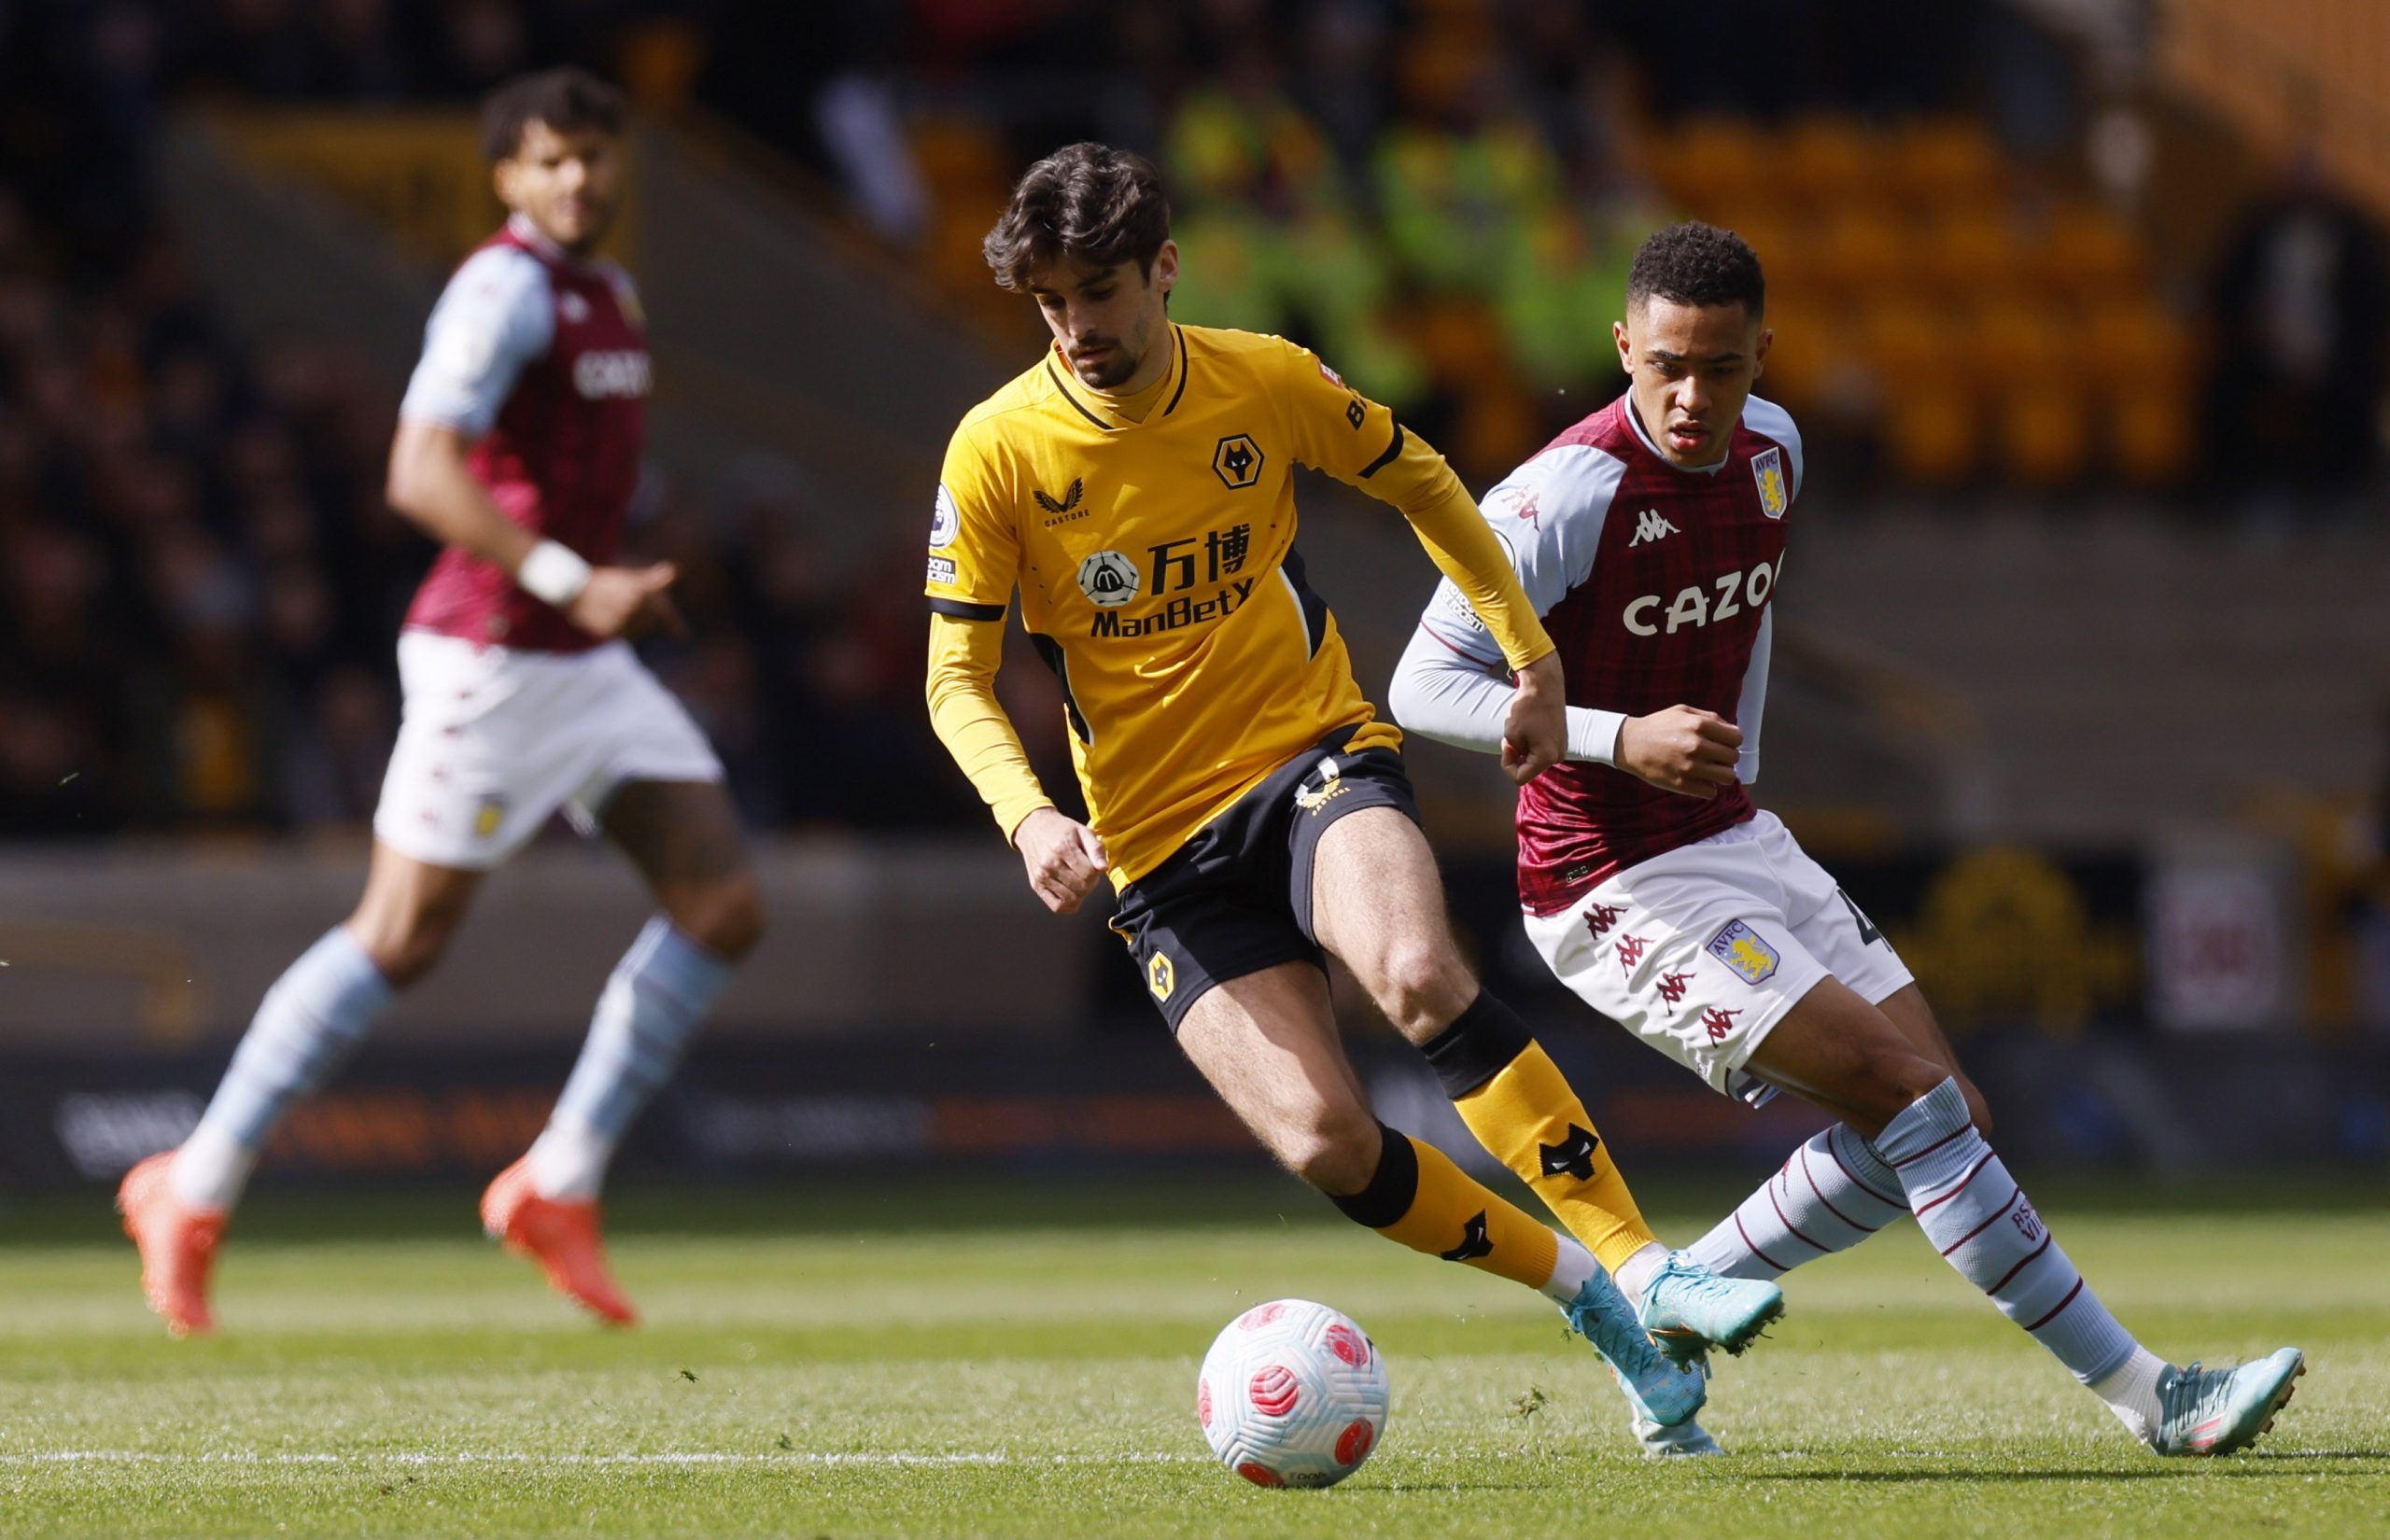 francisco-trincao-wolverhampton-wanderers-barcelona-premier-league-la-liga-wolves-transfer-news-sporting-cpSoccer Football - Premier League - Wolverhampton Wanderers v Aston Villa - Molineux Stadium, Wolverhampton, Britain - April 2, 2022 Wolverhampton Wanderers' Francisco Trincao in action with Aston Villa's Jacob Ramsey Action Images via Reuters/Andrew Couldridge EDITORIAL USE ONLY. No use with unauthorized audio, video, data, fixture lists, club/league logos or 'live' services. Online in-matc